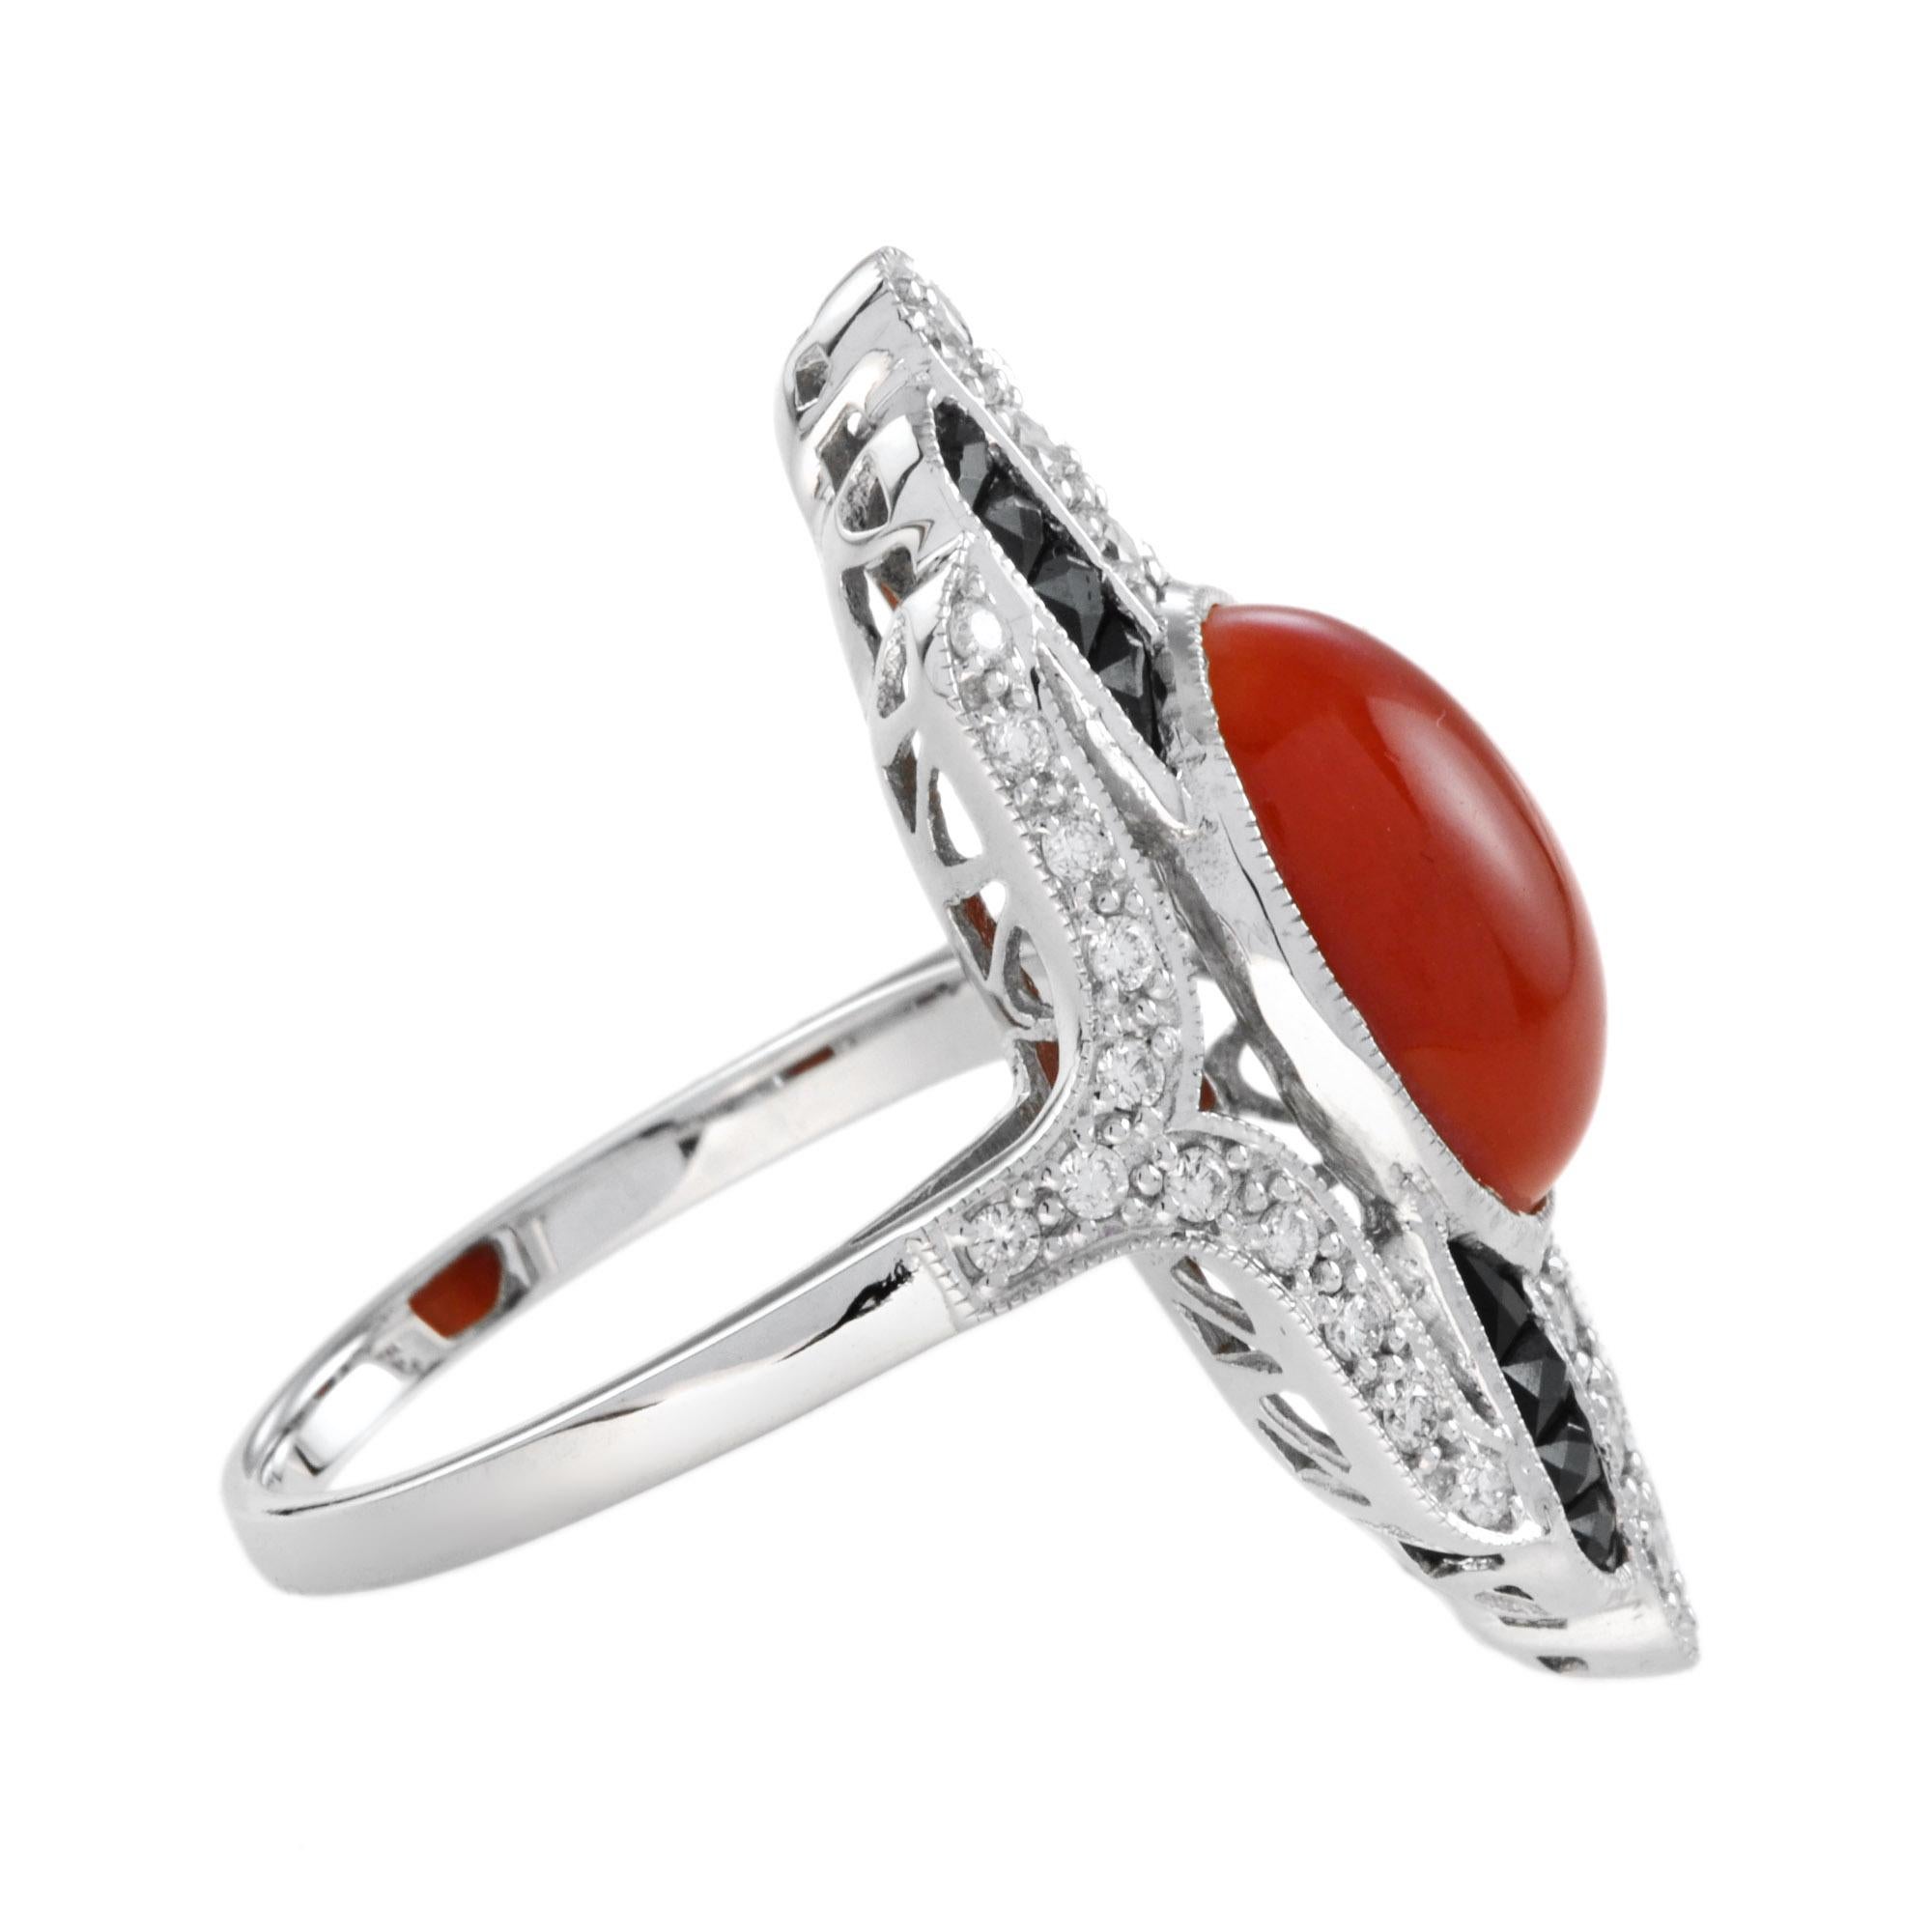 Women's Art Deco Style Cabochon Coral with Diamond and Onyx Cocktail Ring in 14K Gold